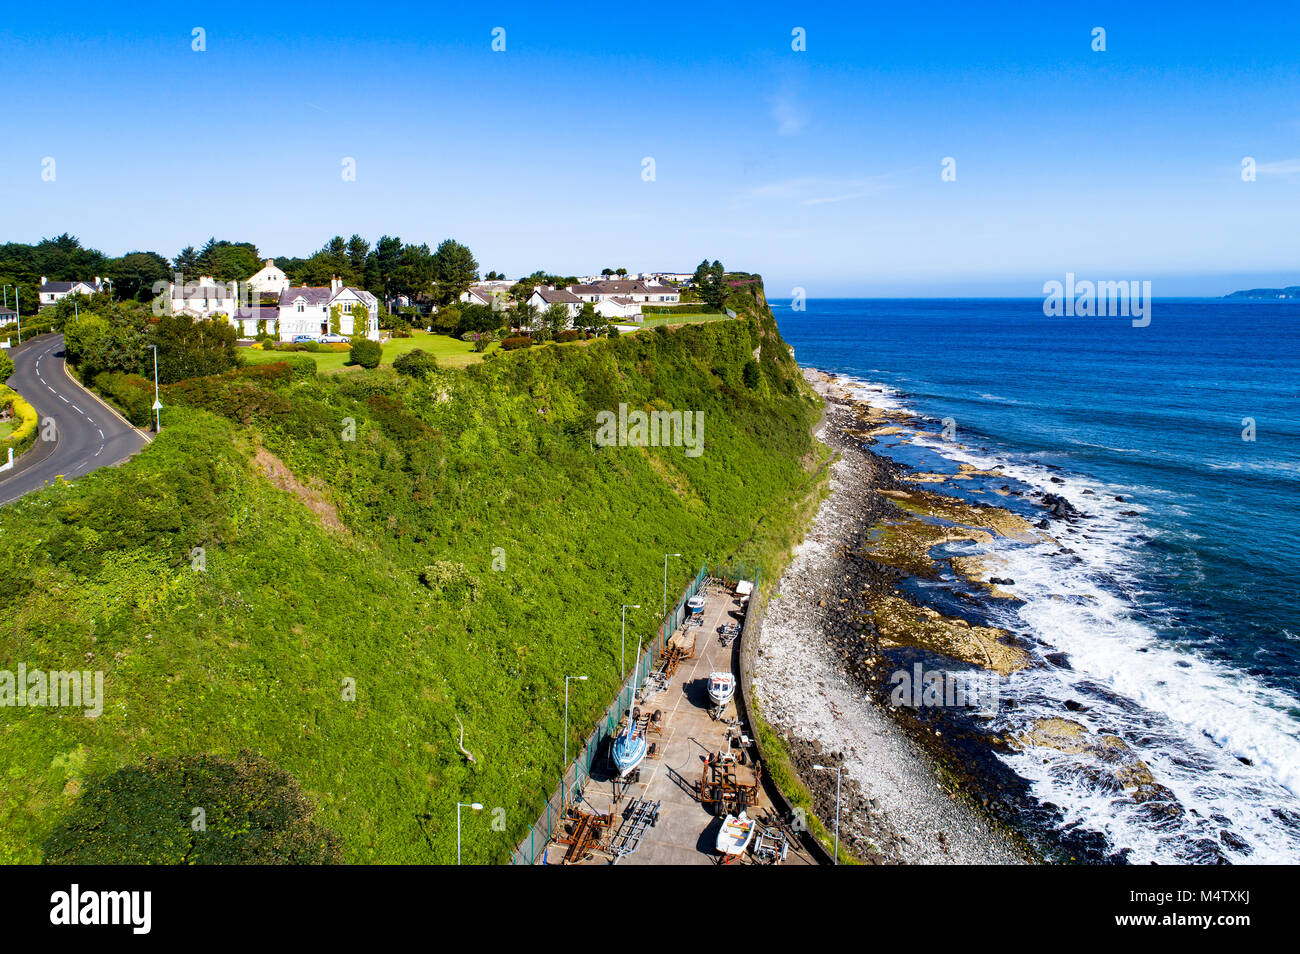 Atlantic coast with a steep cliff, marina and Causeway Coastal Road at Ballycastle, County Antrim, Northern Ireland, UK. Aerial view Stock Photo